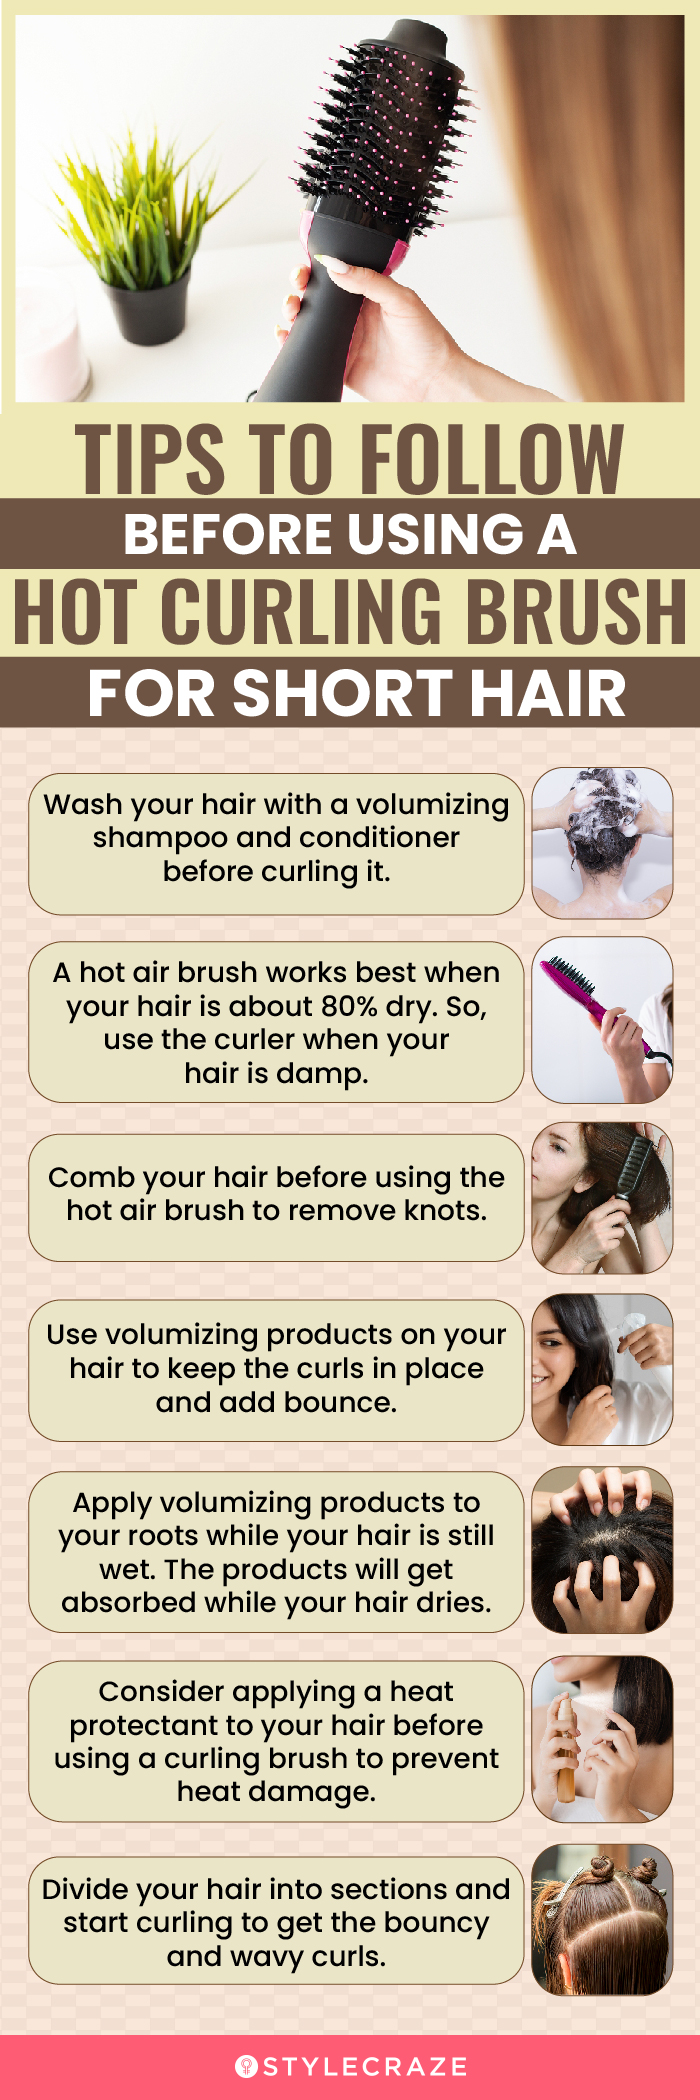 Tips To Follow Before Using Hot Curling Brush For Short Hair (infographic)